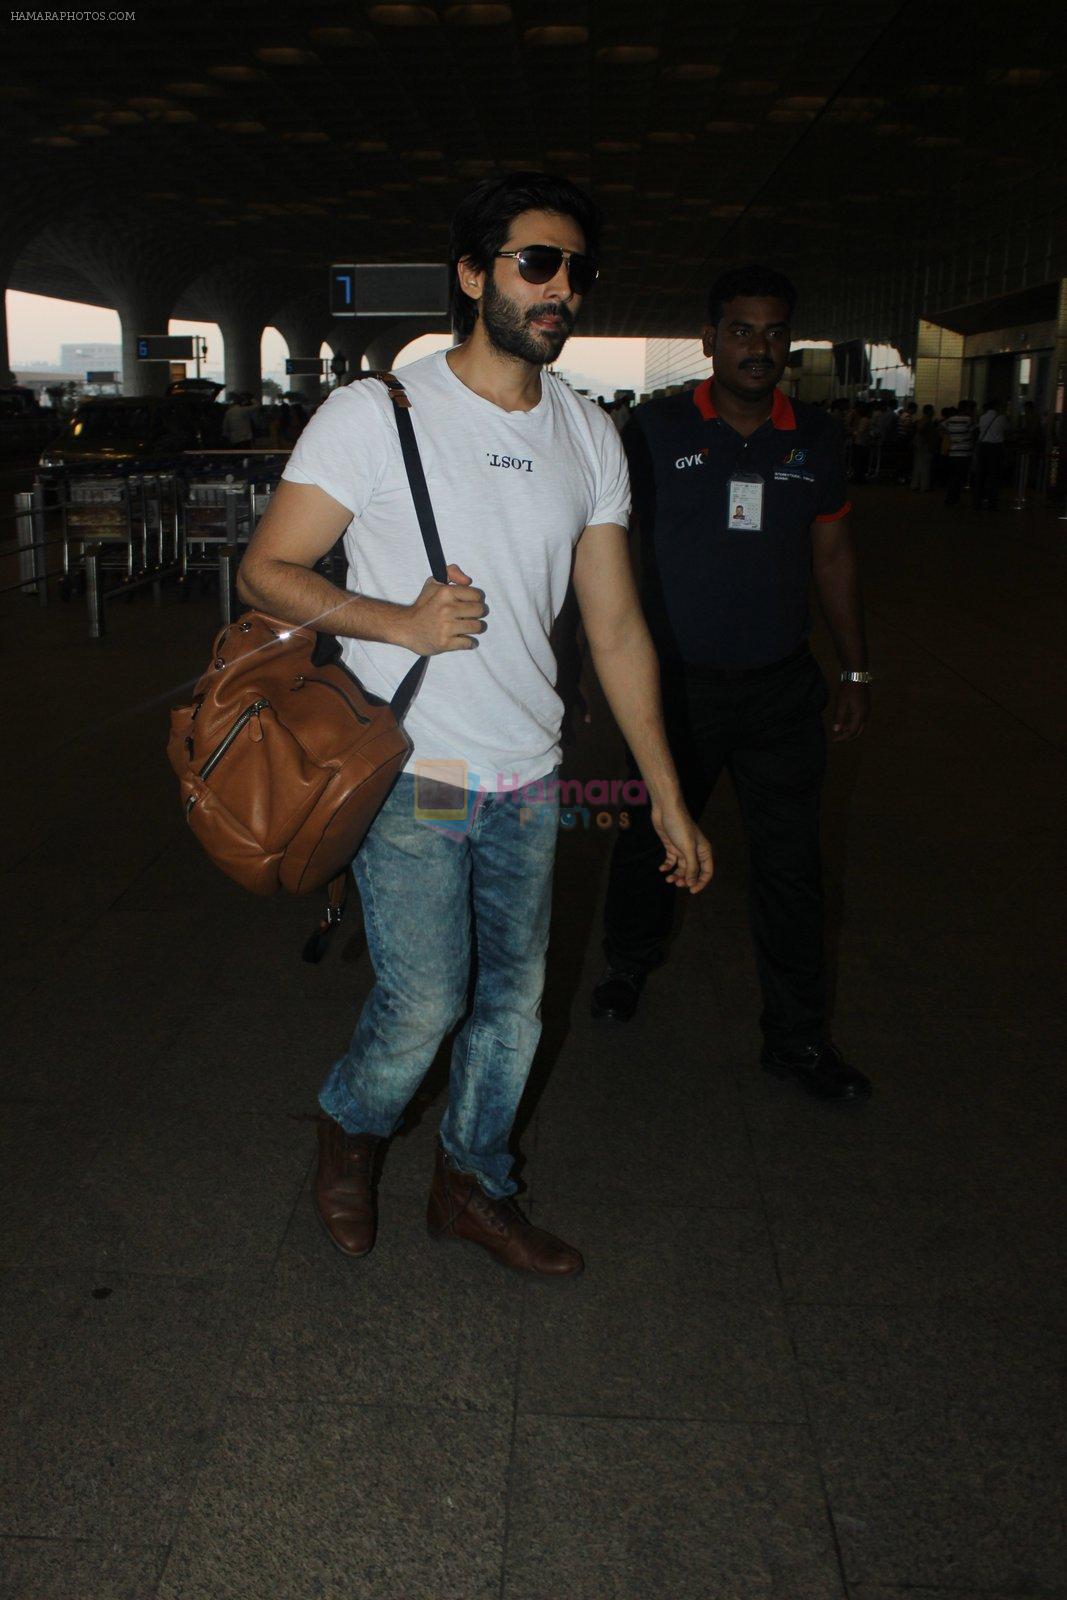 Kartik Aaryan snapped at airport on 17th March 2016